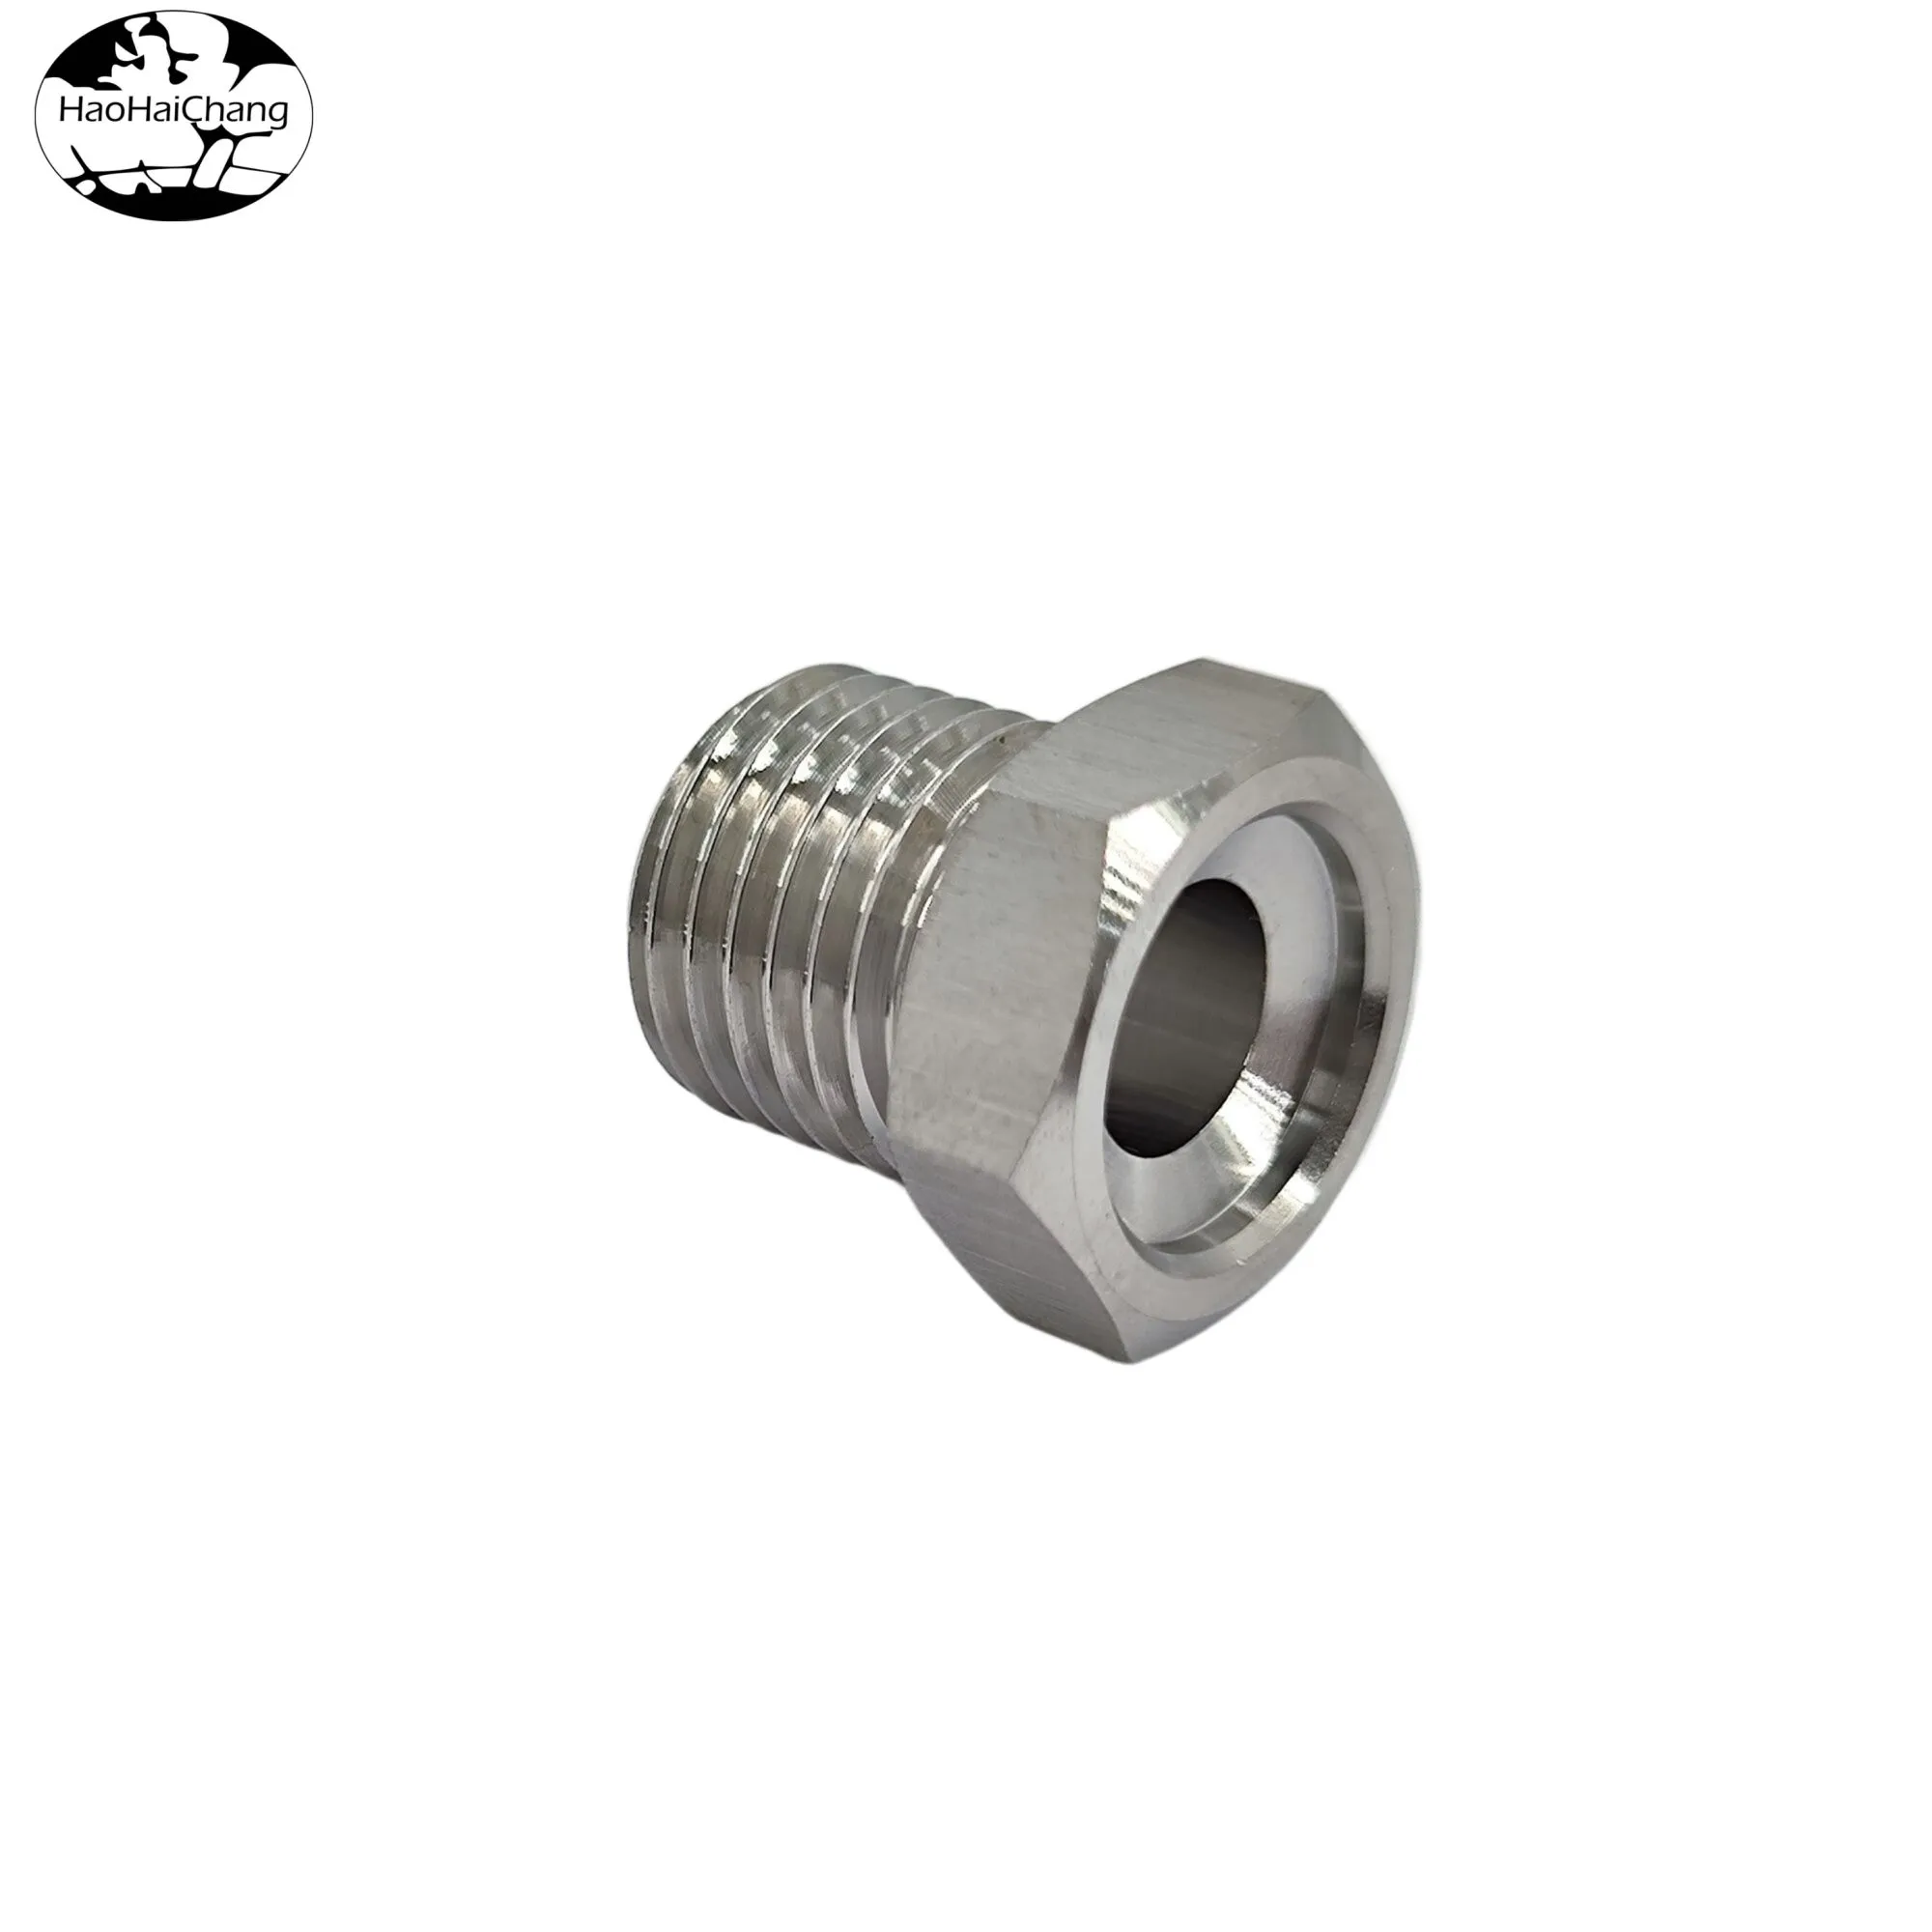 HHC-576 M14 Stainless Steel Hexagonal T-shaped Hollow Stud